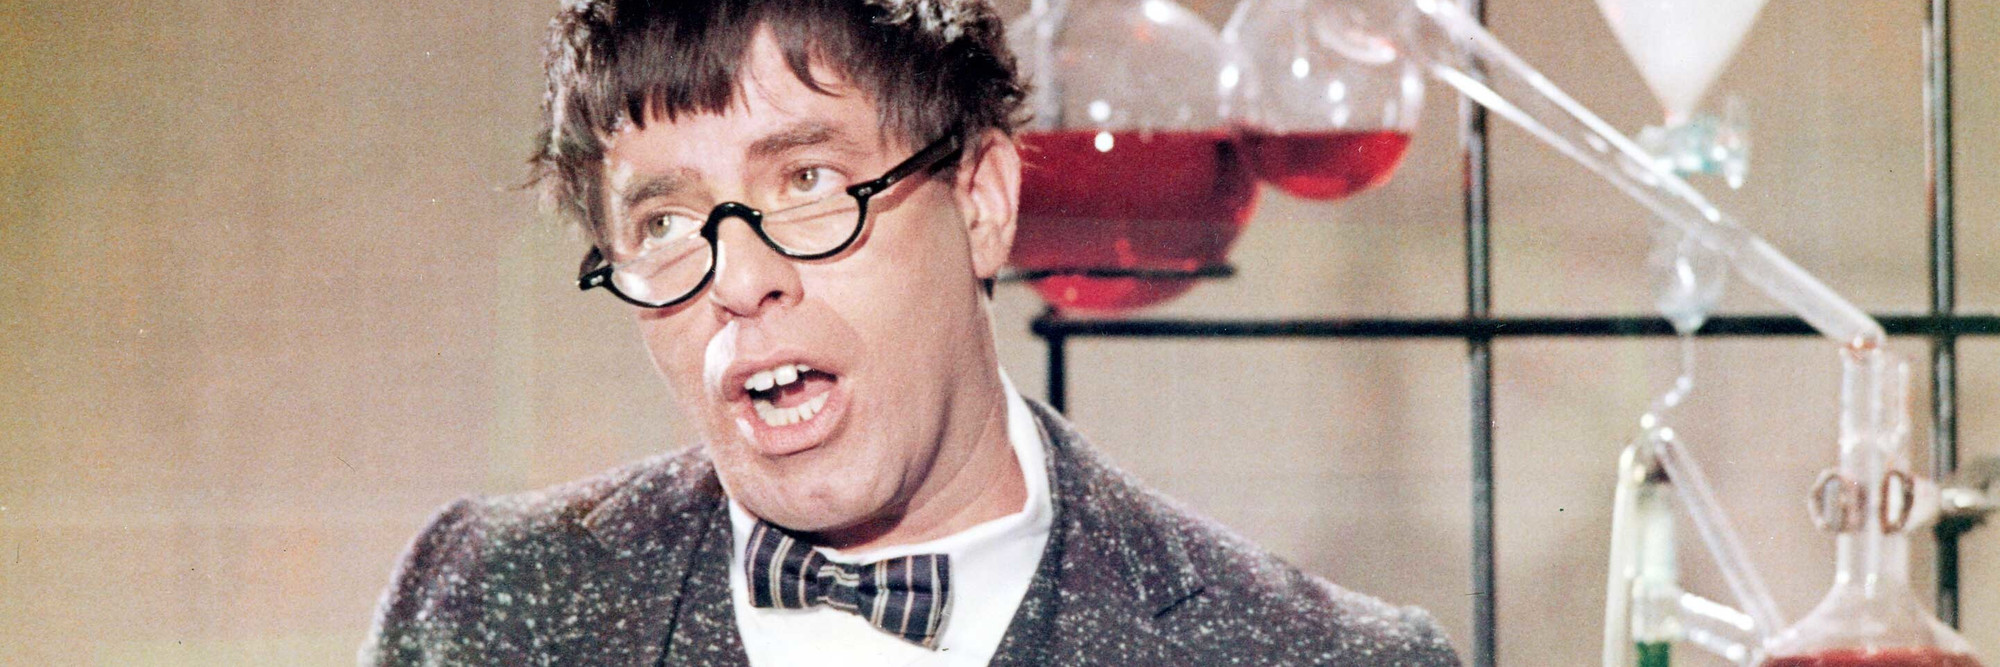 Jerry Lewis as the Nutty Professor on The Jerry Lewis Show, NBC, 1967–69. Courtesy NBC/Photofest